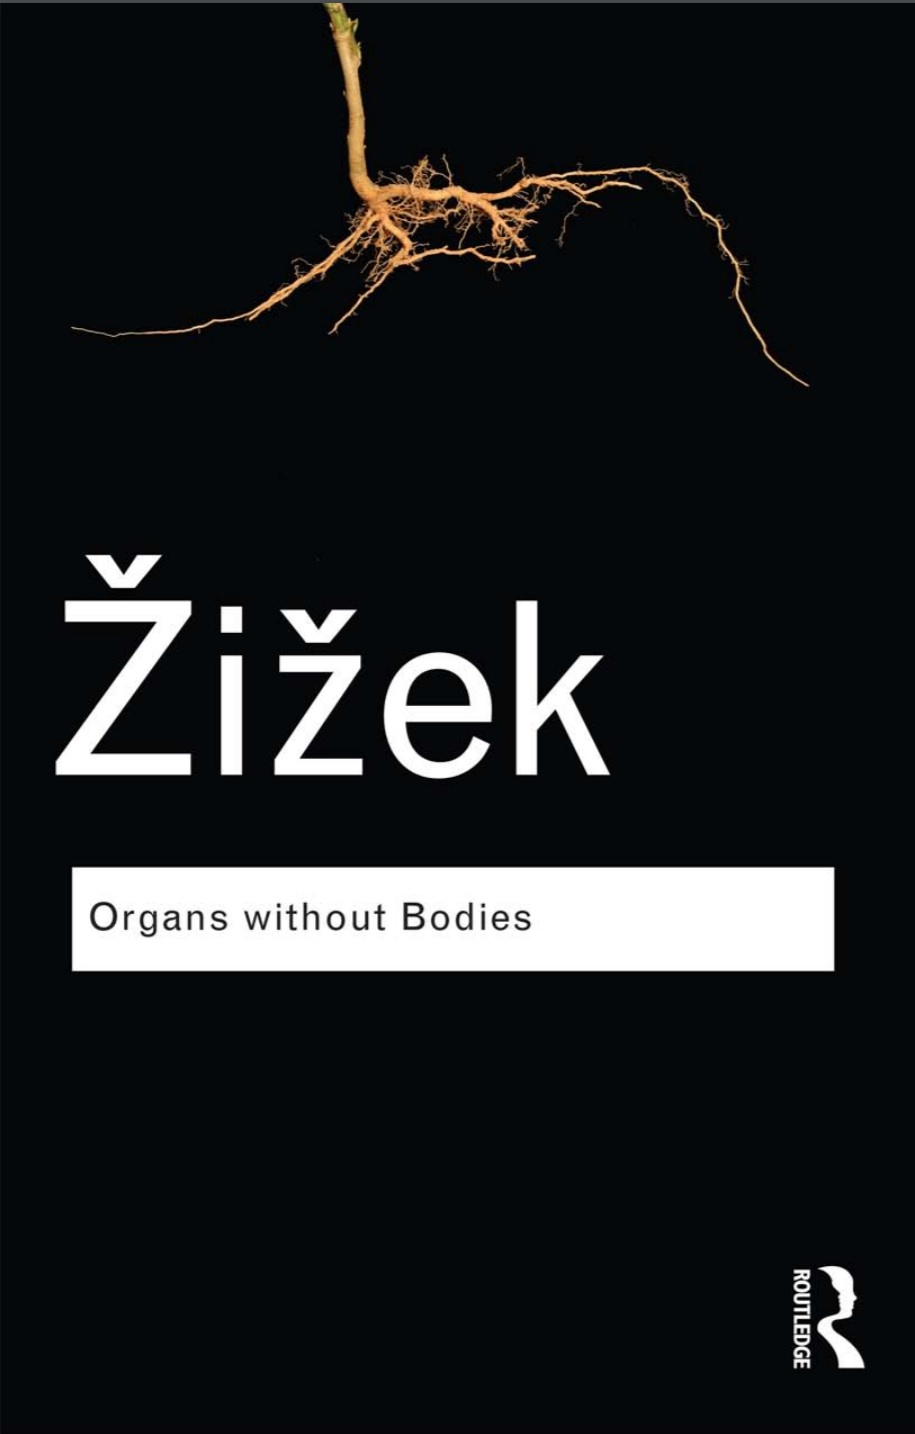 Slavoj-zizek-organs-without-bodies-deleuze-and-consequences-theoryleaks.jpg